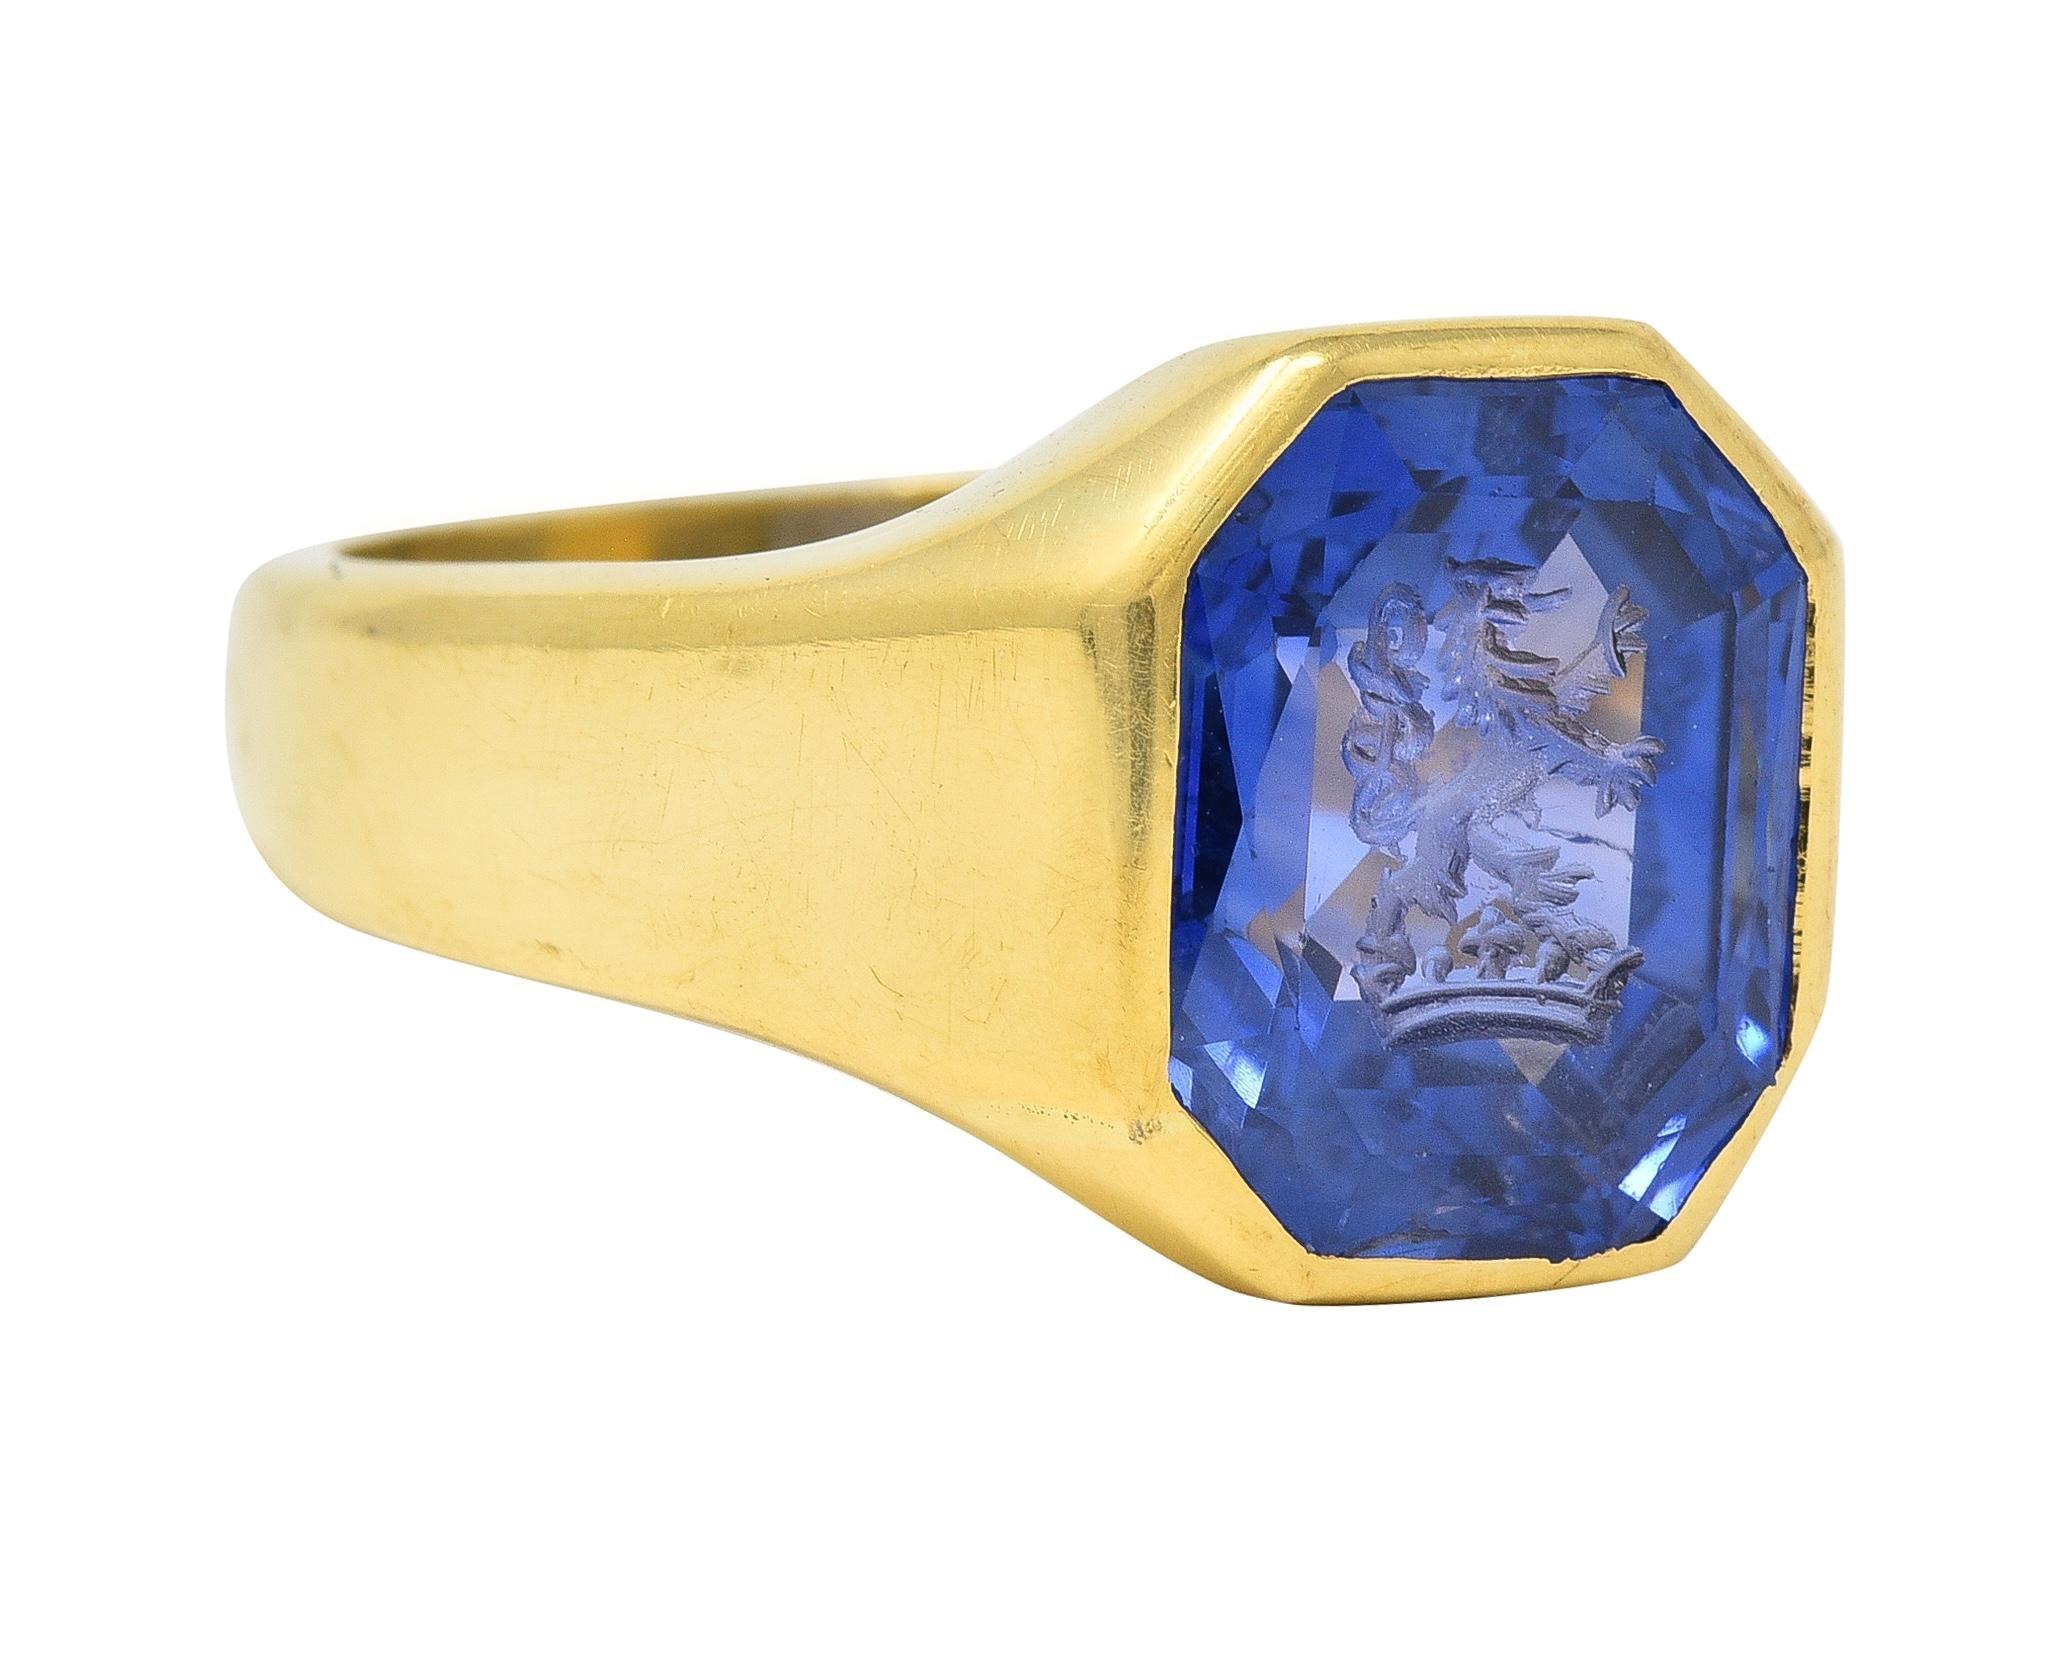 Centering an octagonal mixed-cut sapphire weighing 2.86 carats - transparent blue in color
Natural Sri Lankan in origin with no indications of heat treatment
Carved with an intaglio of a heraldic lion and crown
Bezel set with a contoured gold